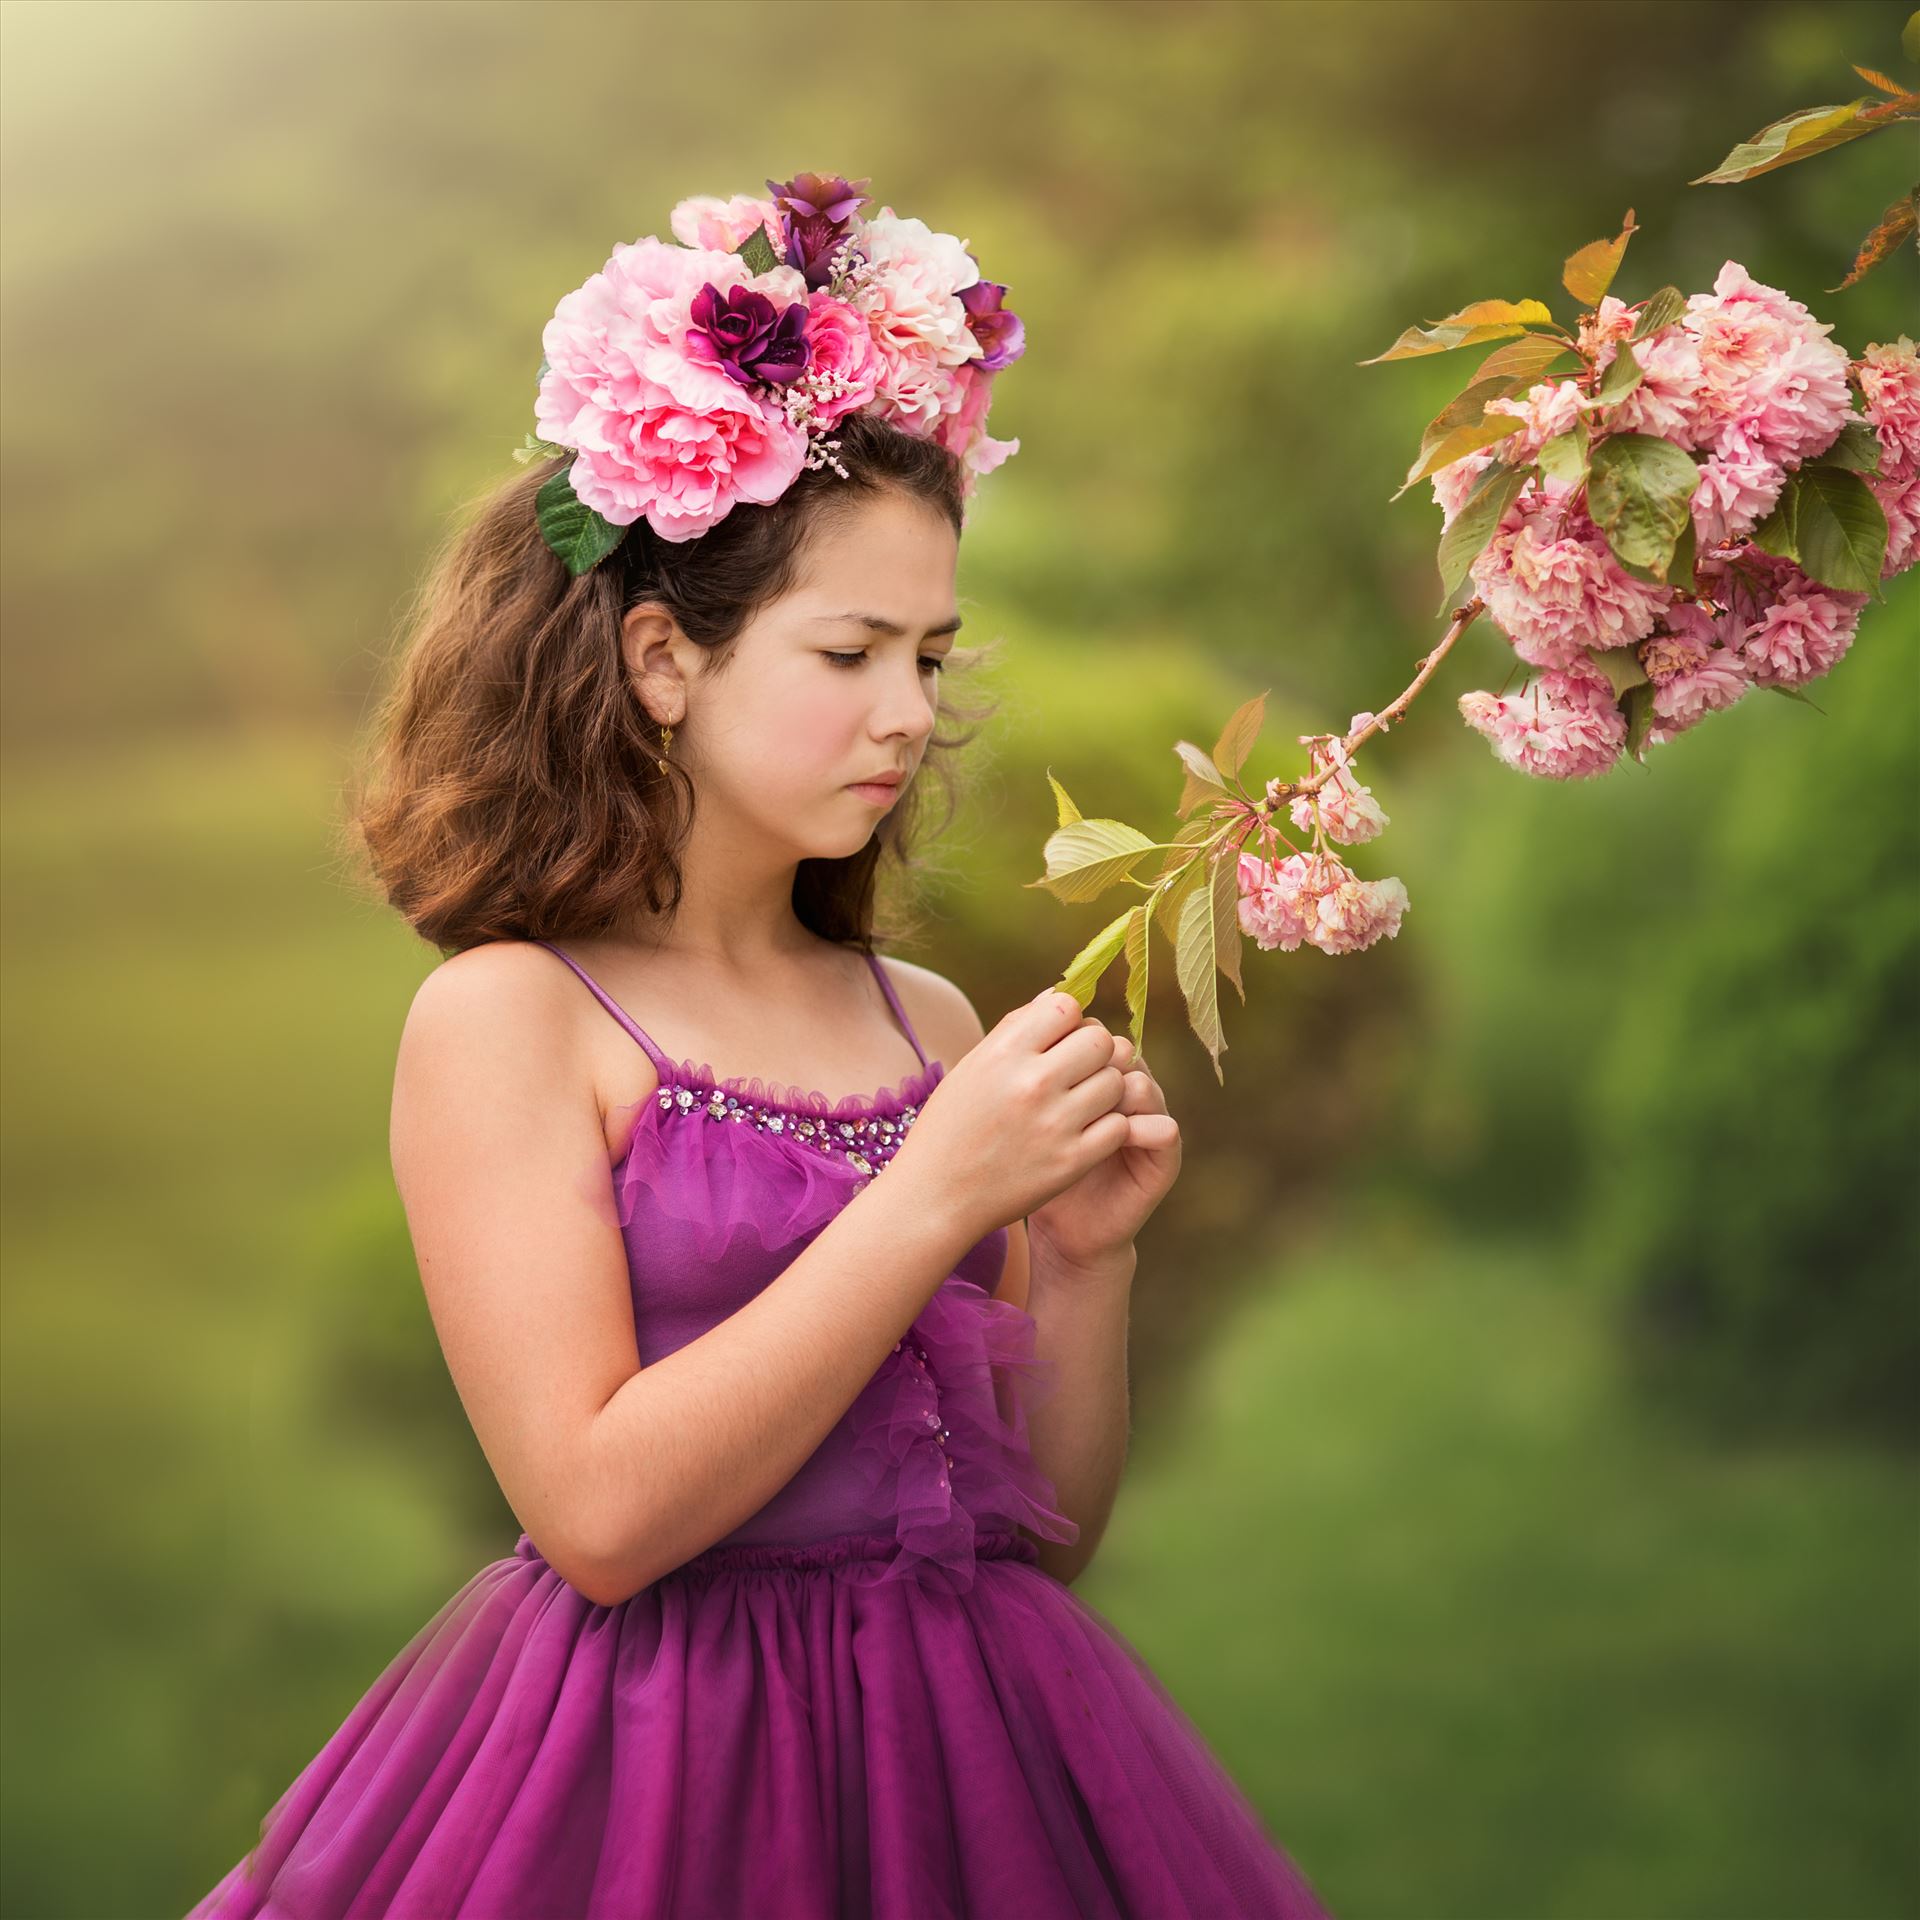 ChildFlower Children's Fine Art, Art, kids, portrait, photography. by Maria Angelopoulos Photogrpahy